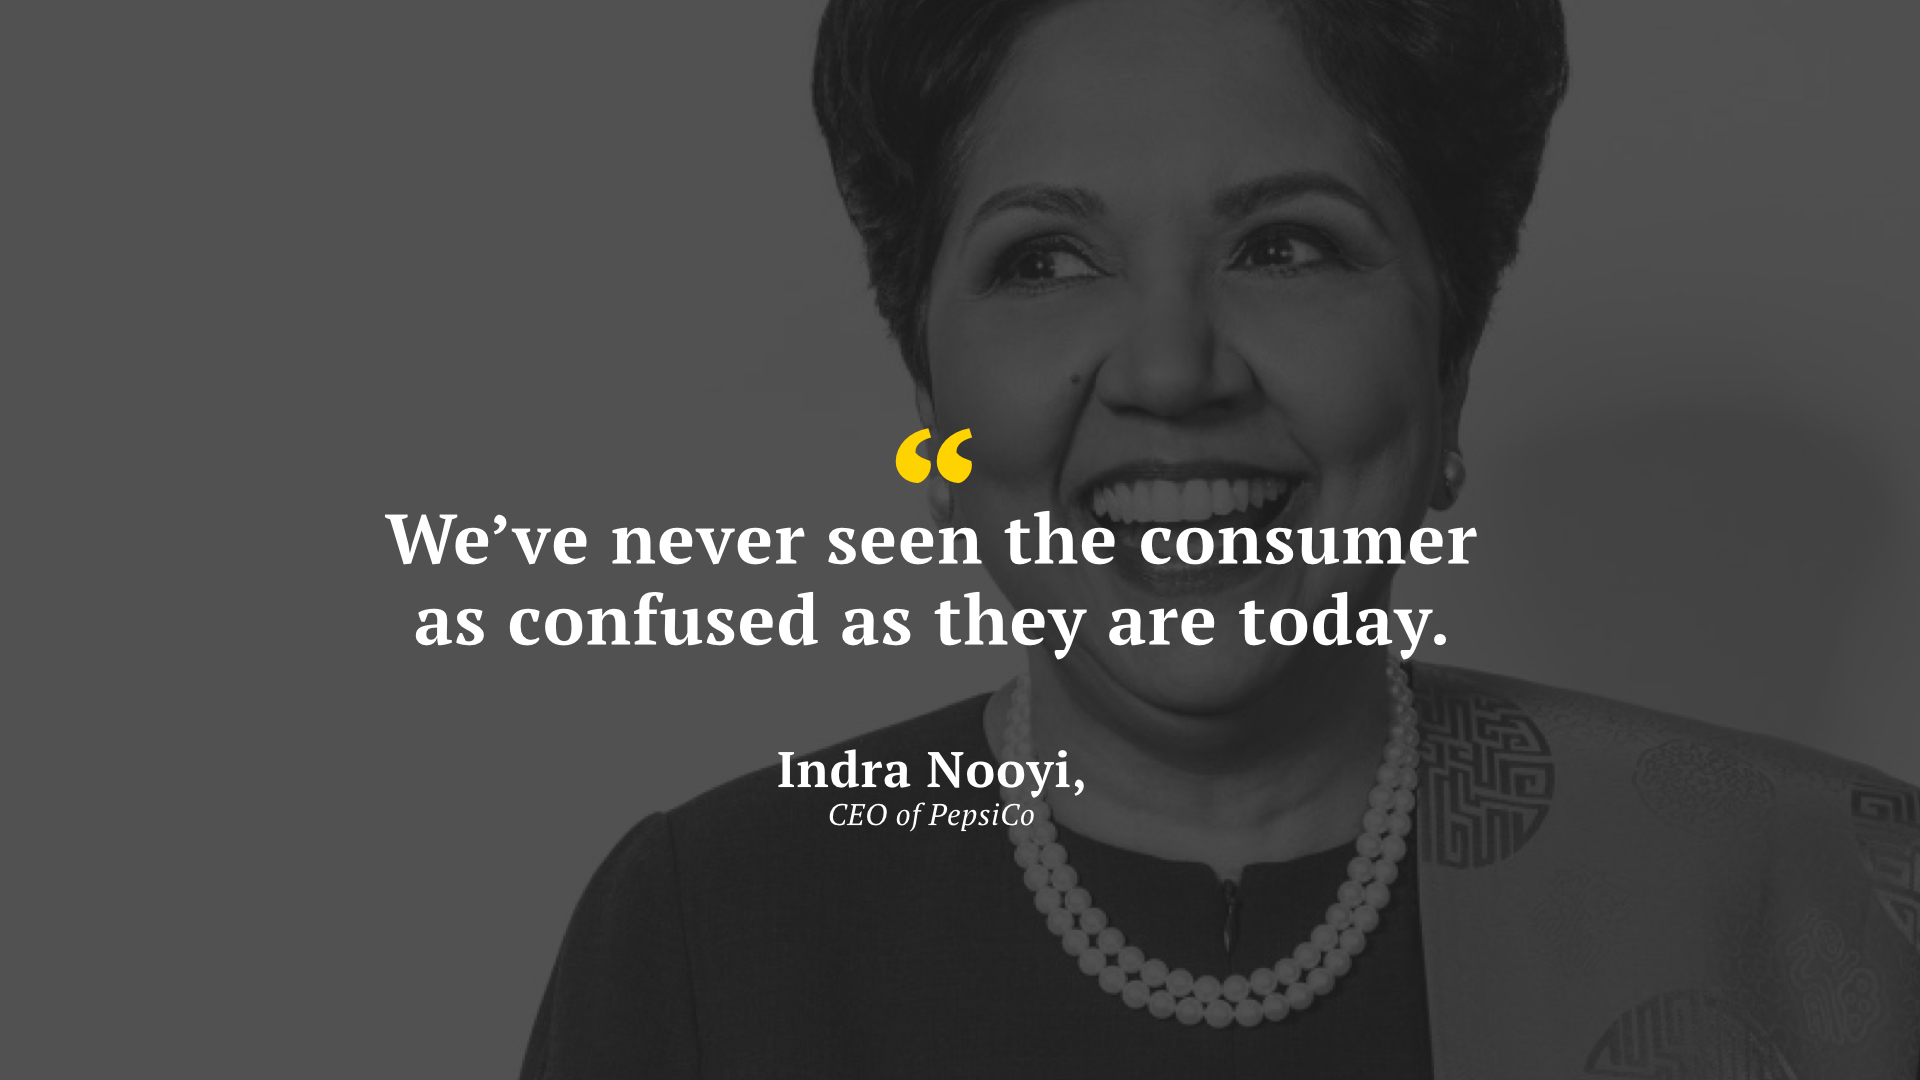  Industry leaders such as Indra Nooyi, CEO of Pepsi admits that this uncertainty in the ingredients sector has caused total confusion amongst food shoppers today. 